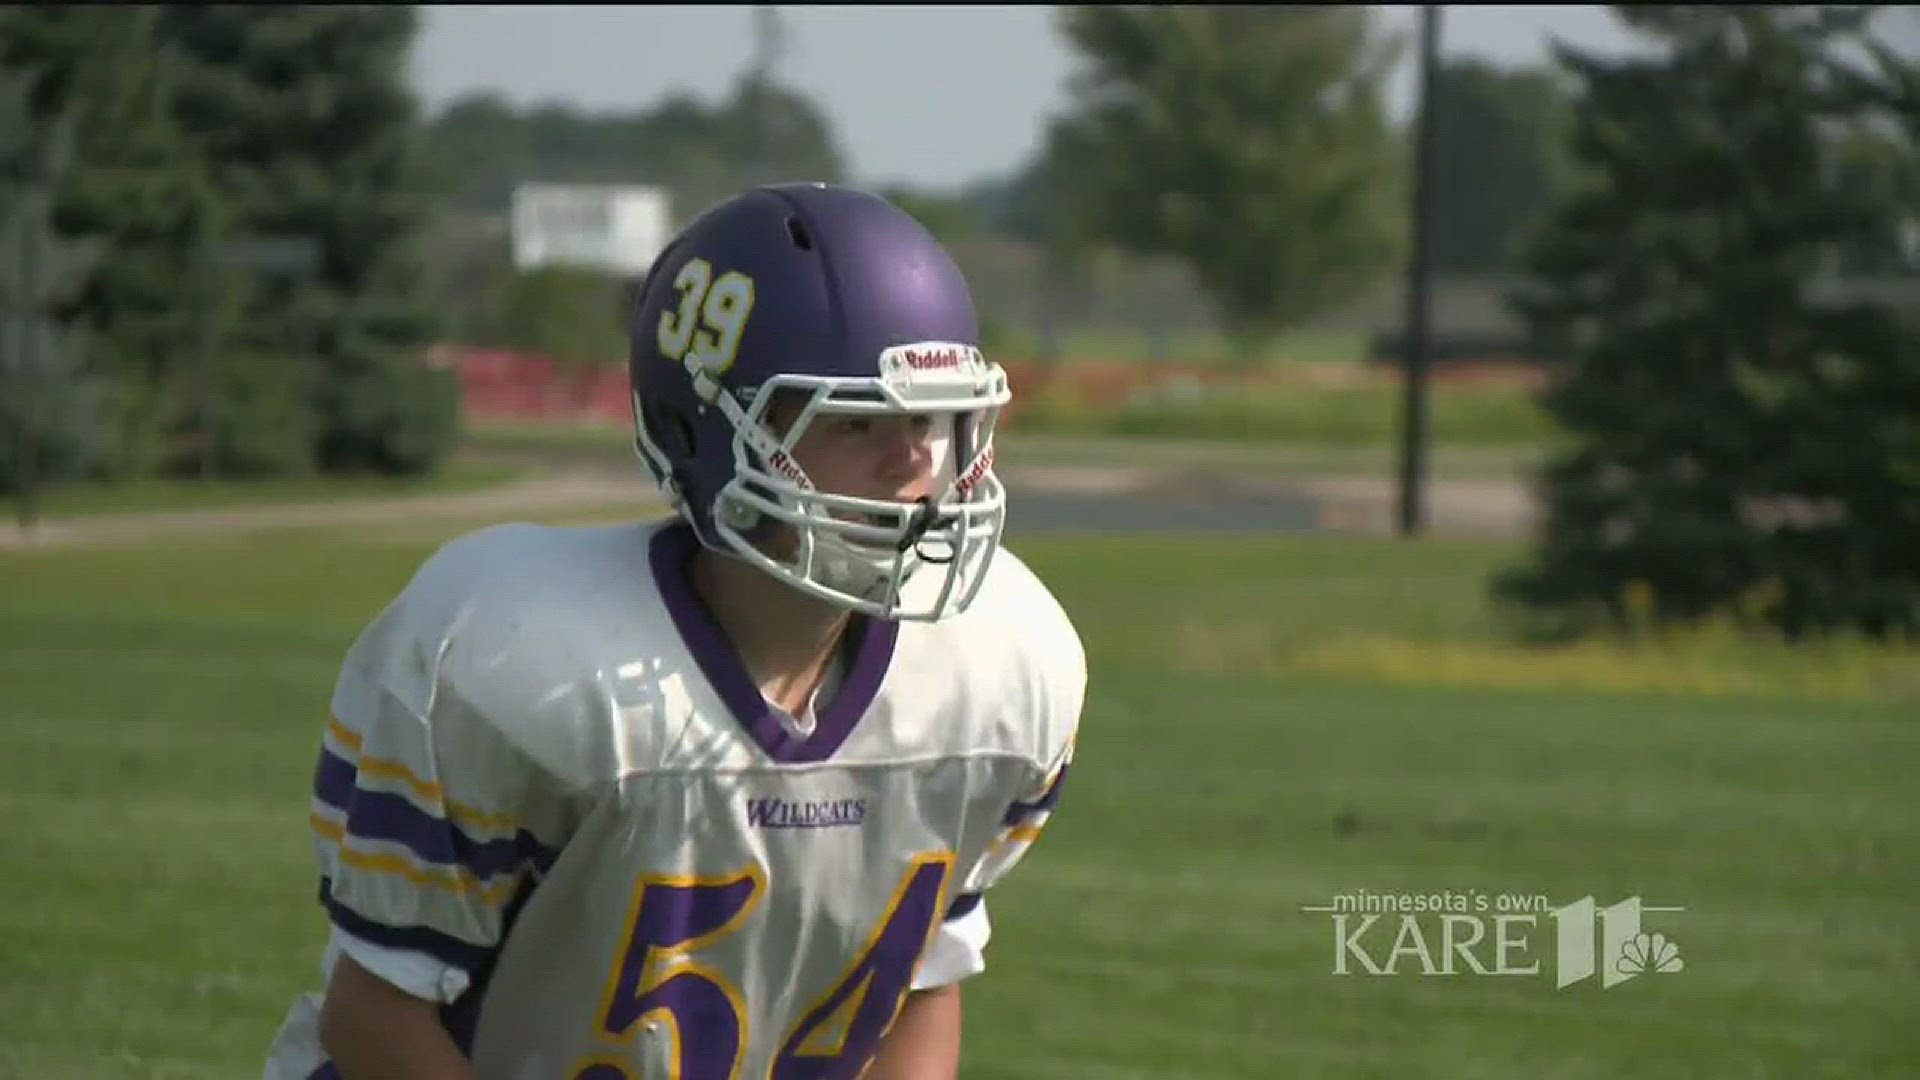 Tate Maurer decided to play football after falling in love with the Madden video game while he was battling back from cancer treatments.